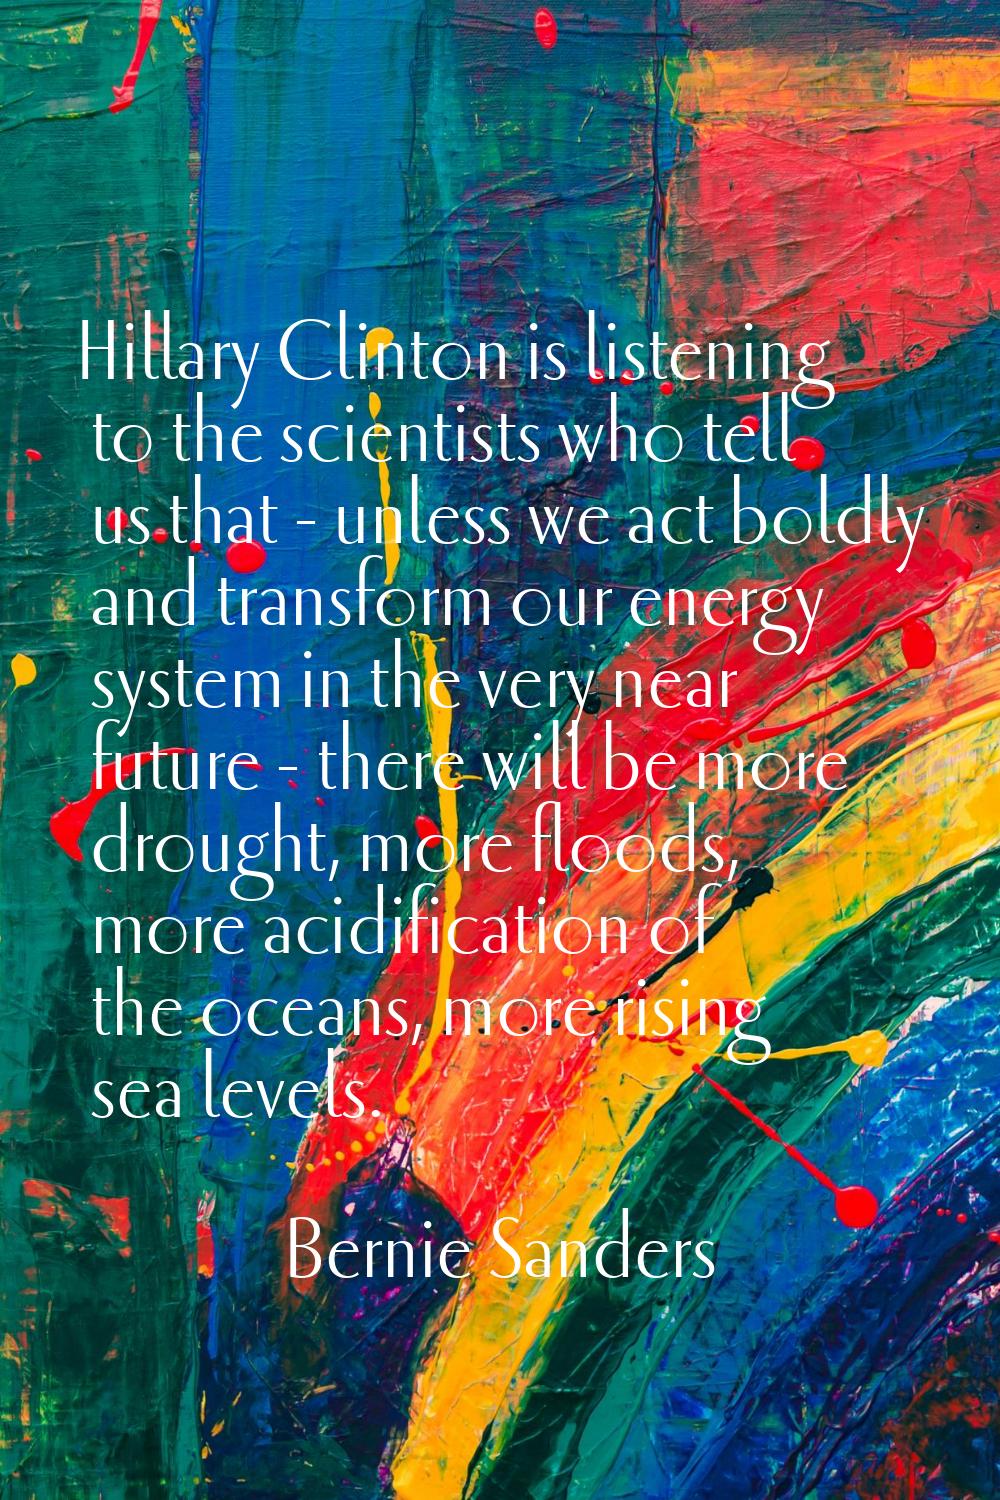 Hillary Clinton is listening to the scientists who tell us that - unless we act boldly and transfor